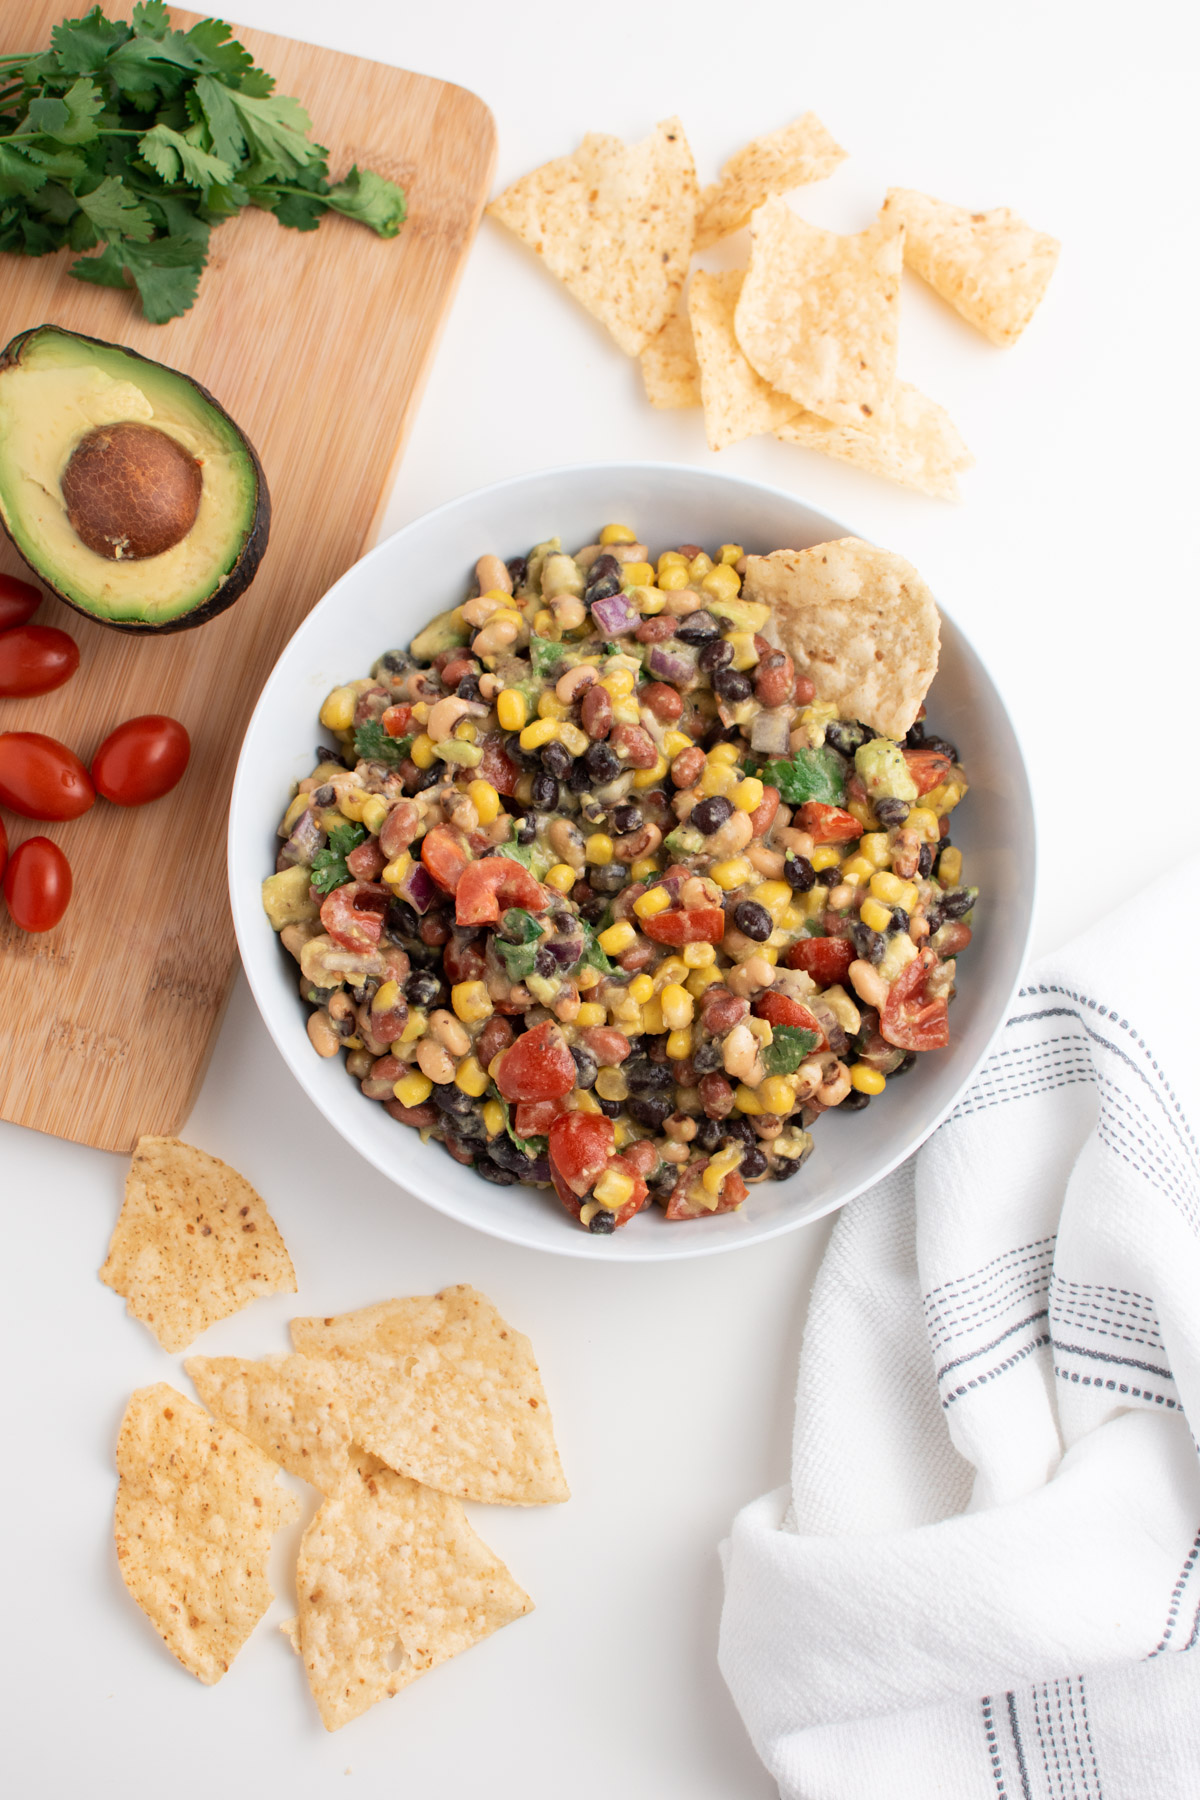 Cowboy caviar with italian dressing in white bowl next to cutting board and tortilla chips.